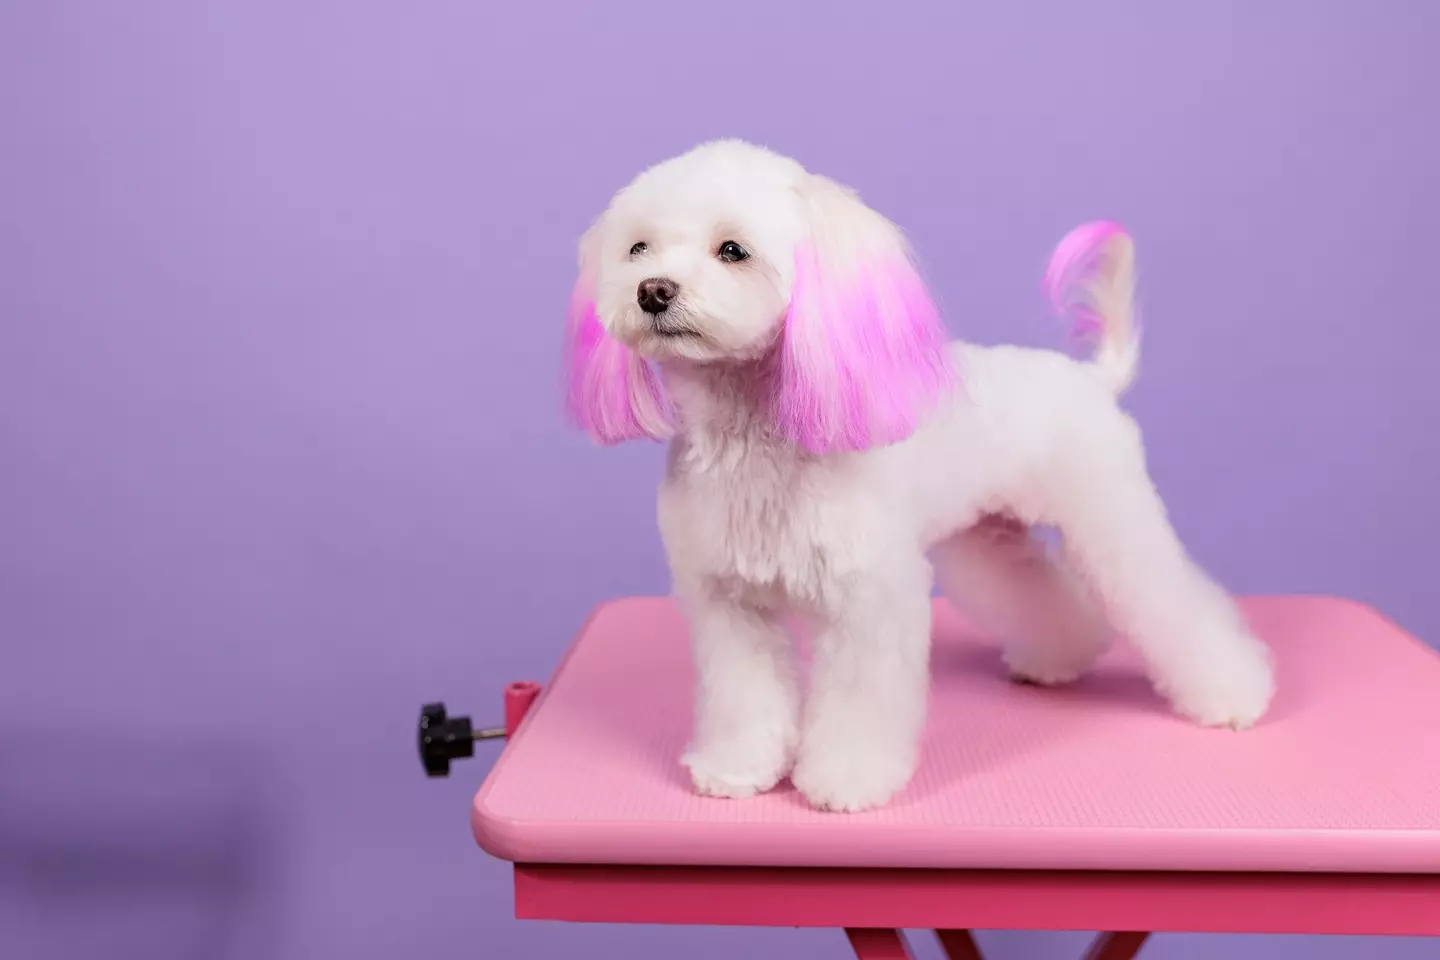 A Maltese dog with dyed ears and tail.